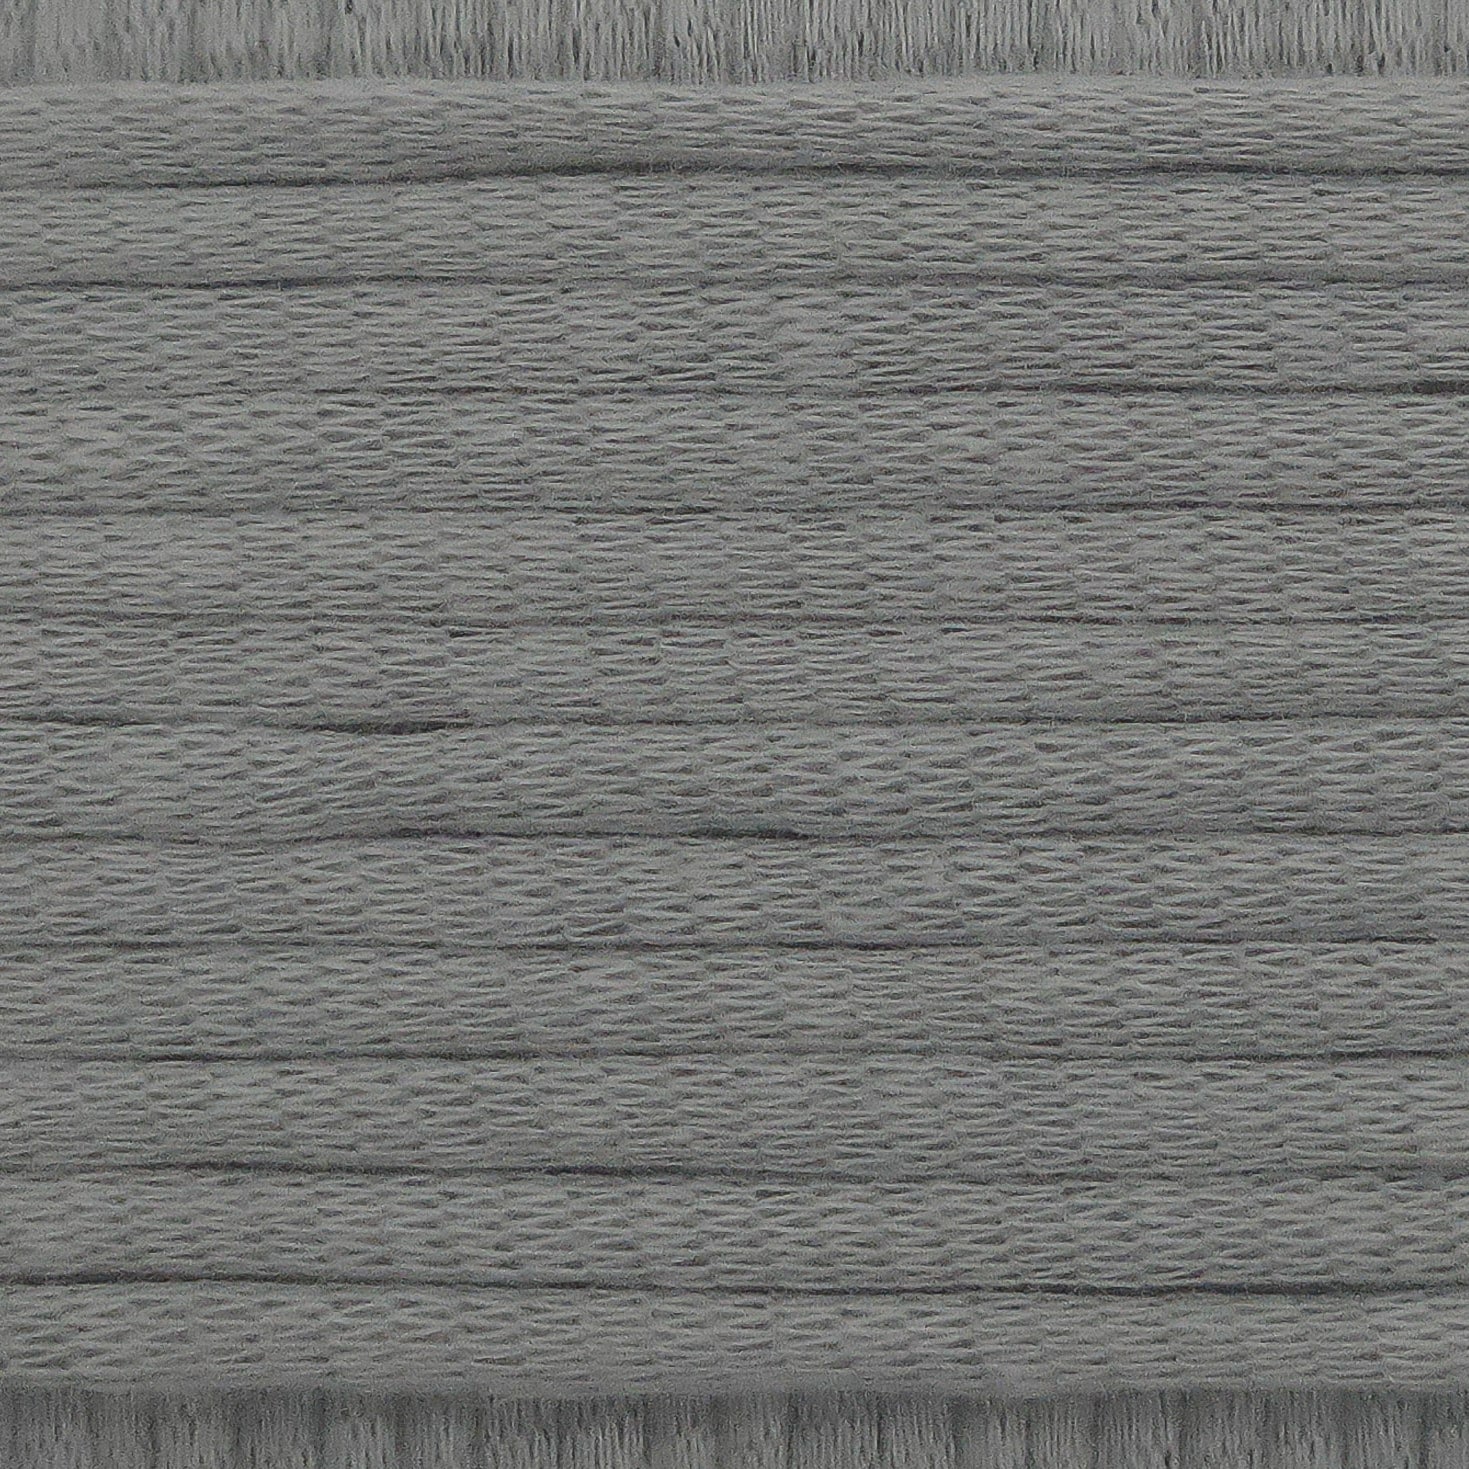 A close-up image showing the texture of a soft grey coloured yarn that is friendly for crochet beginners.